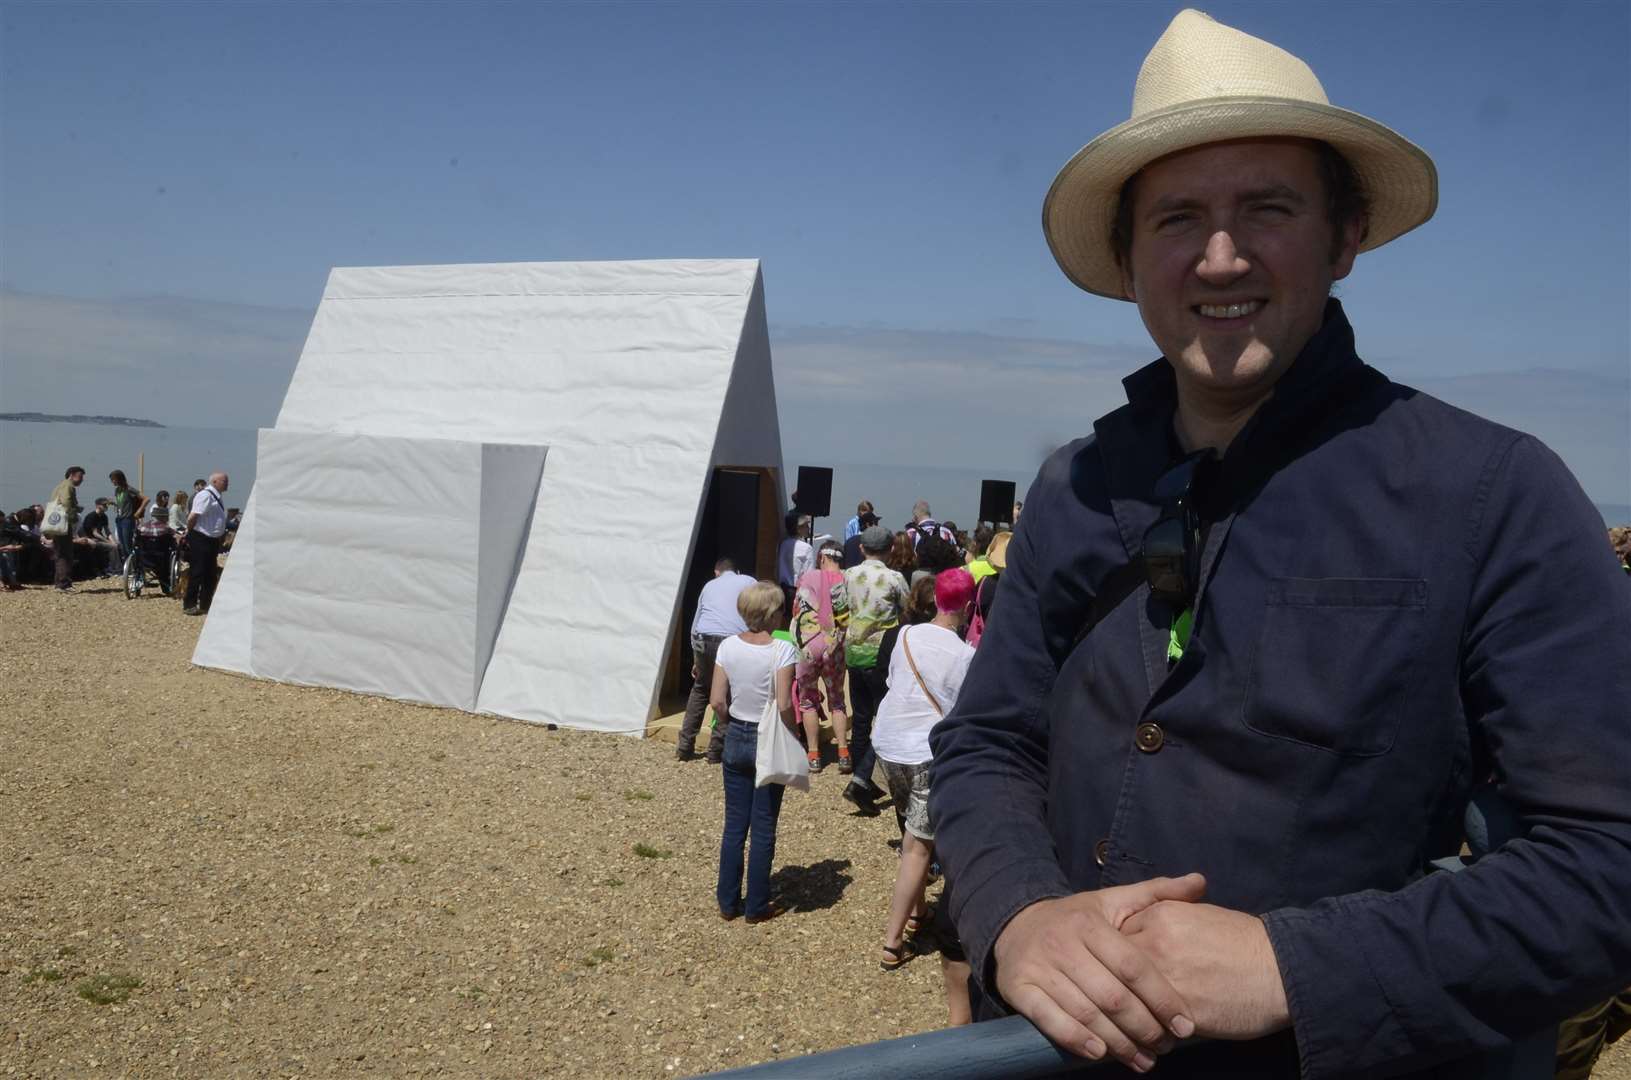 Artist Kieran Reed with his creation on the beach at Cushings View at the start of the 2014 Whitstable Biennale